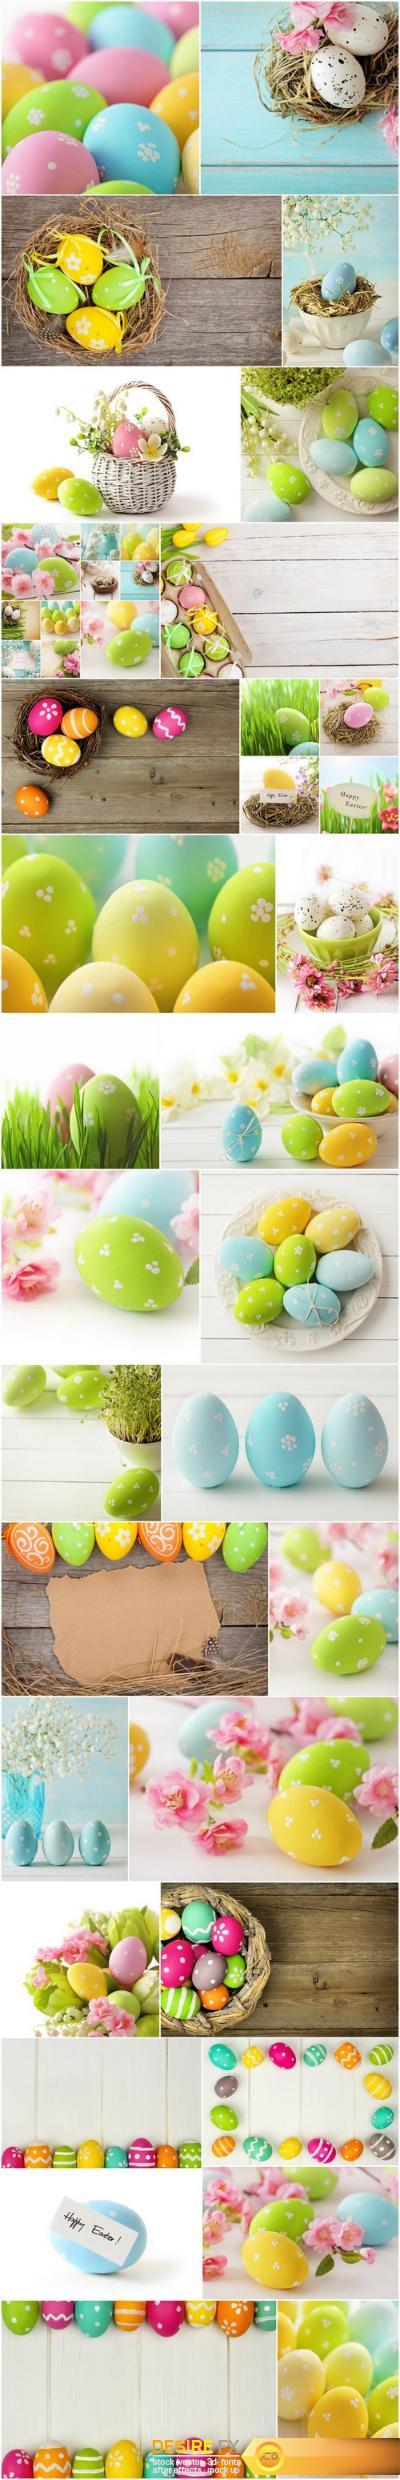 Easter Eggs and Happy Easter 4 - Set of 30xUHQ JPEG Professional Stock Images